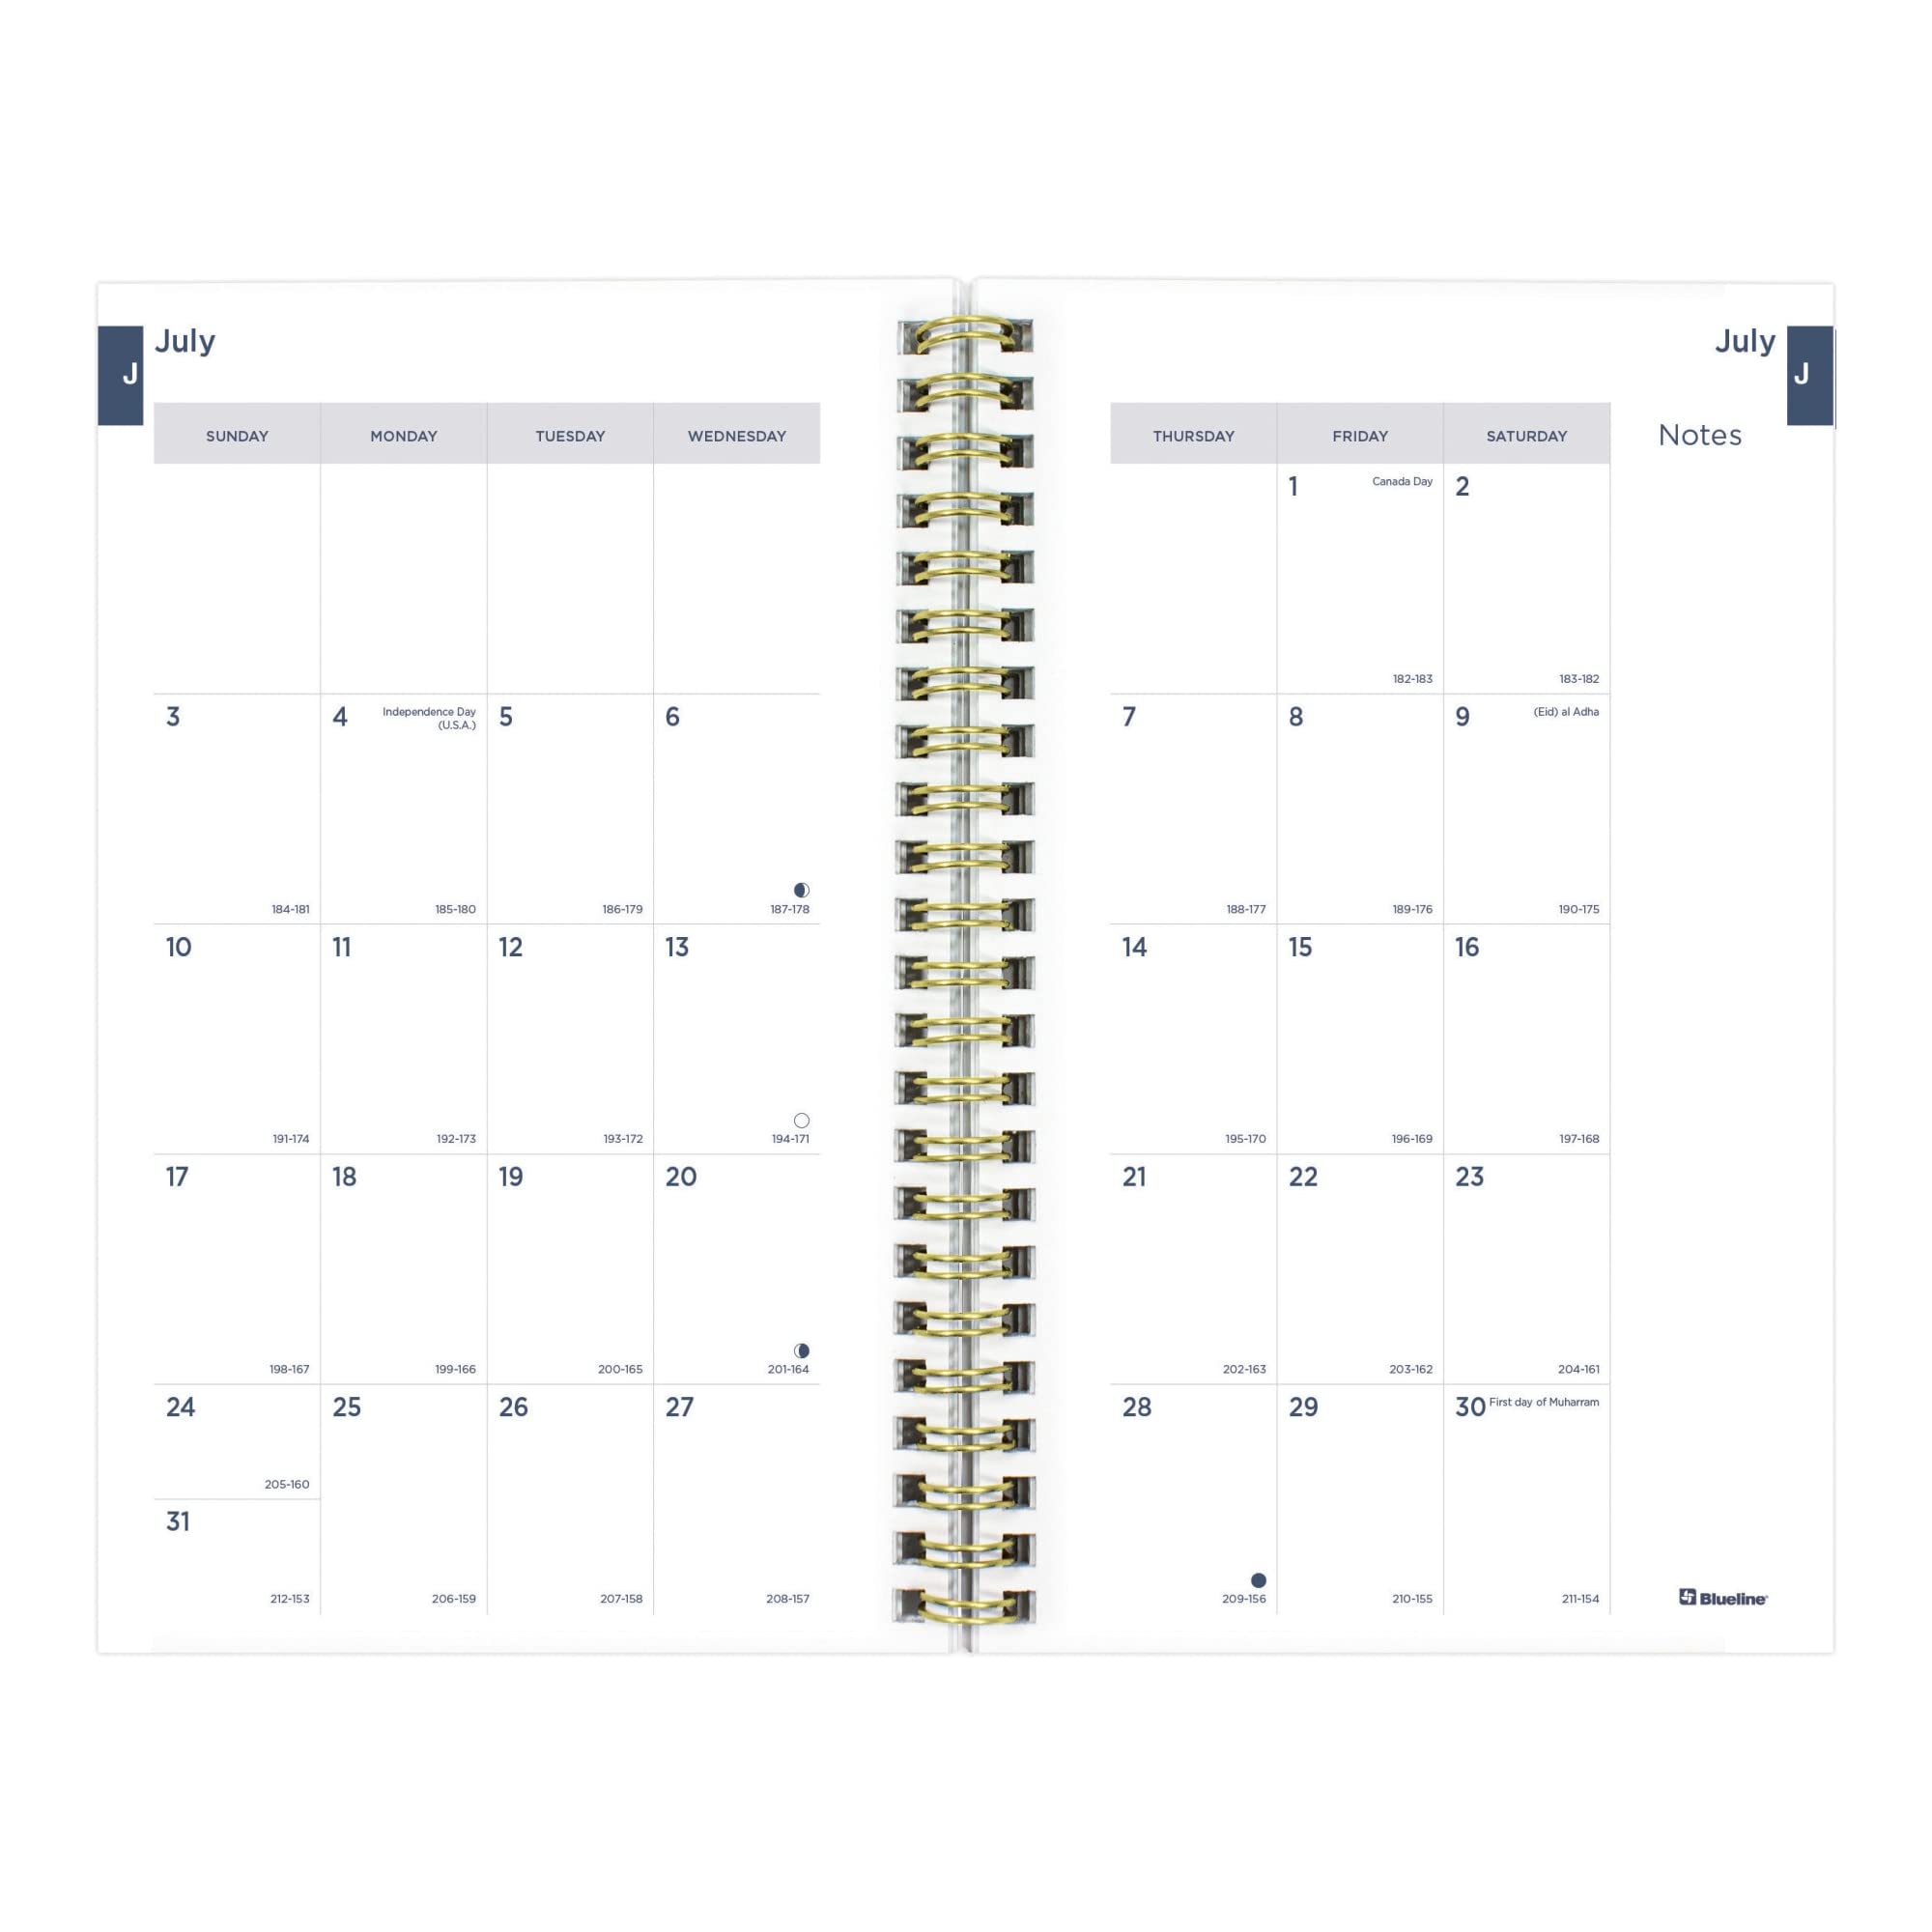 Rediform Blueline Essential Academic Weekly/Monthly Planner, 13 Months, July 2022 to July 2023, Gold Twin-Wire Binding, Poly Cover, 8'' x 5'', Pineapple Design, Navy (CA114PM.02-23)